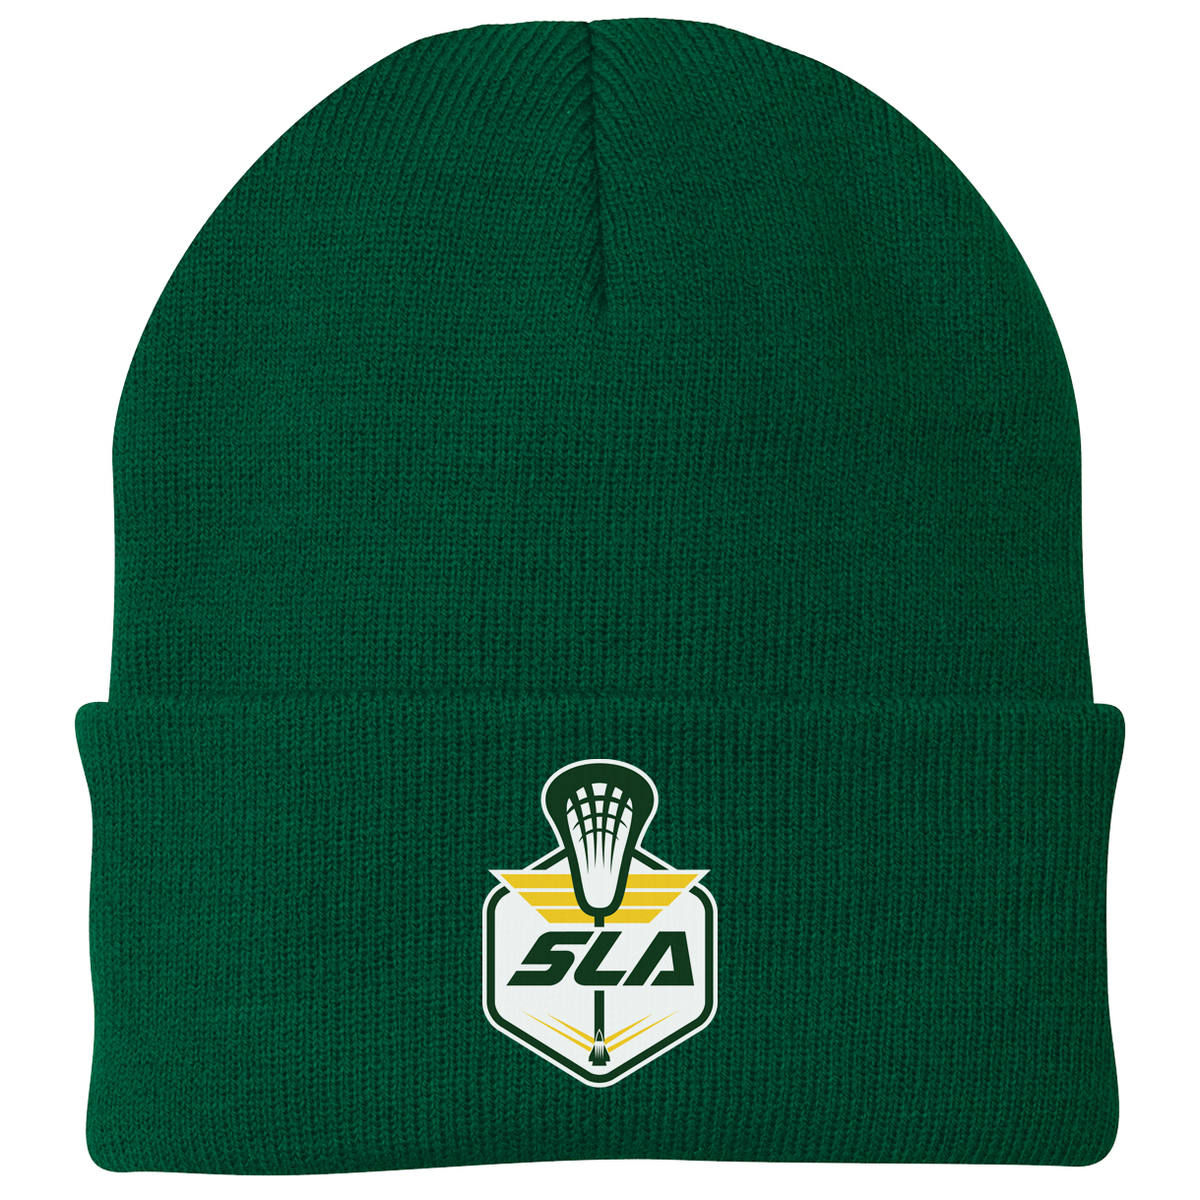 Sycamore Lacrosse Association Green Knit Beanie